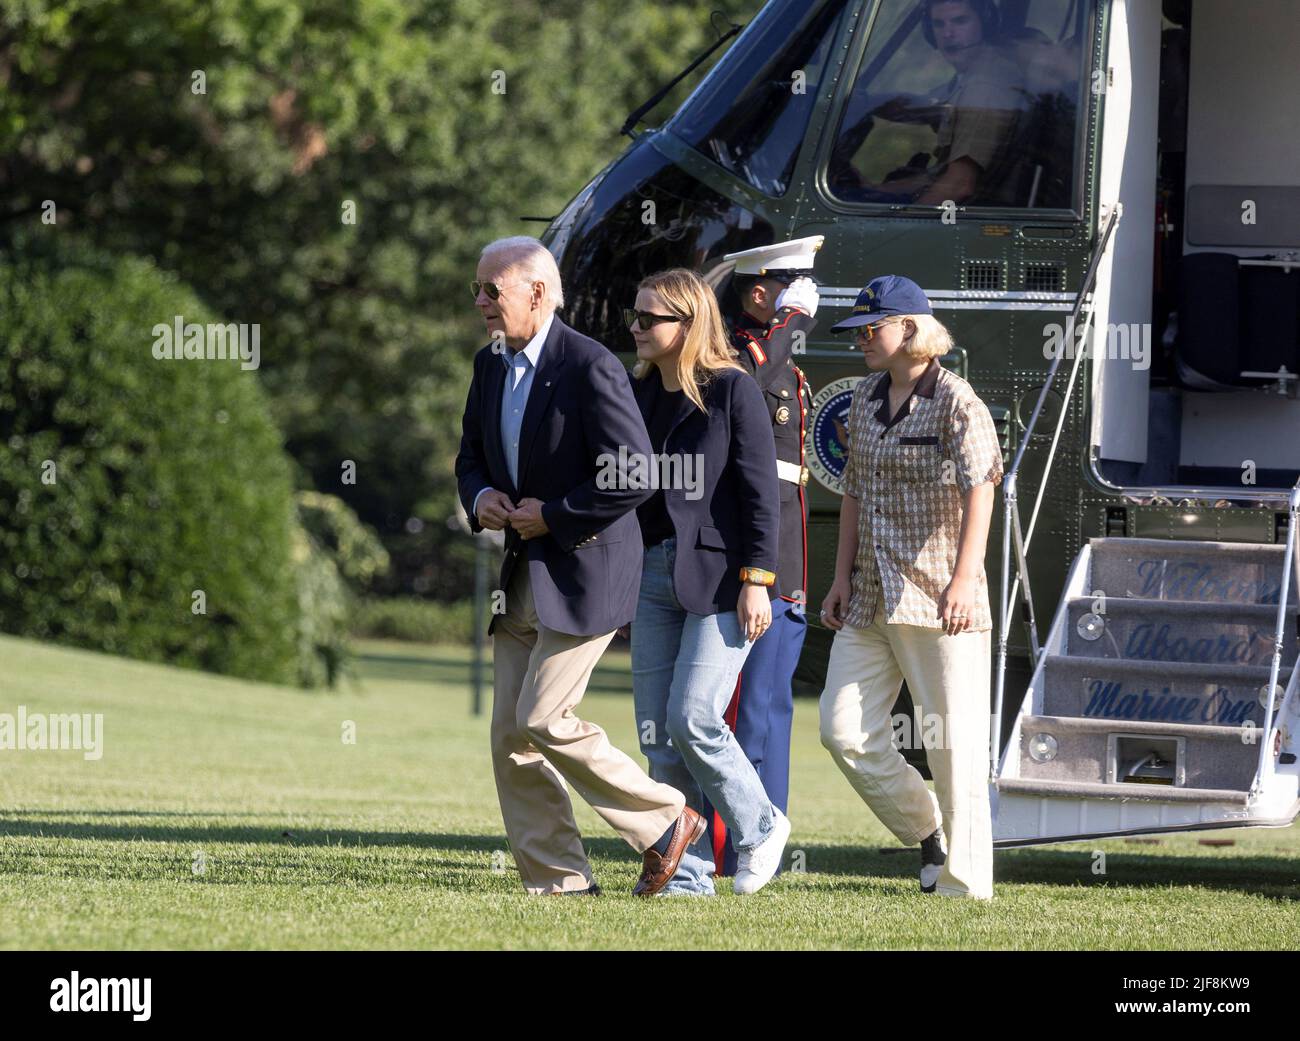 U.S. President Joe Biden walks to the White House with his granddaughters Finnegan and Maisy Biden, after arriving at the White House following his trip to Europe, in Washington, U.S., June 30, 2022. REUTERS/Evelyn Hockstein Stock Photo